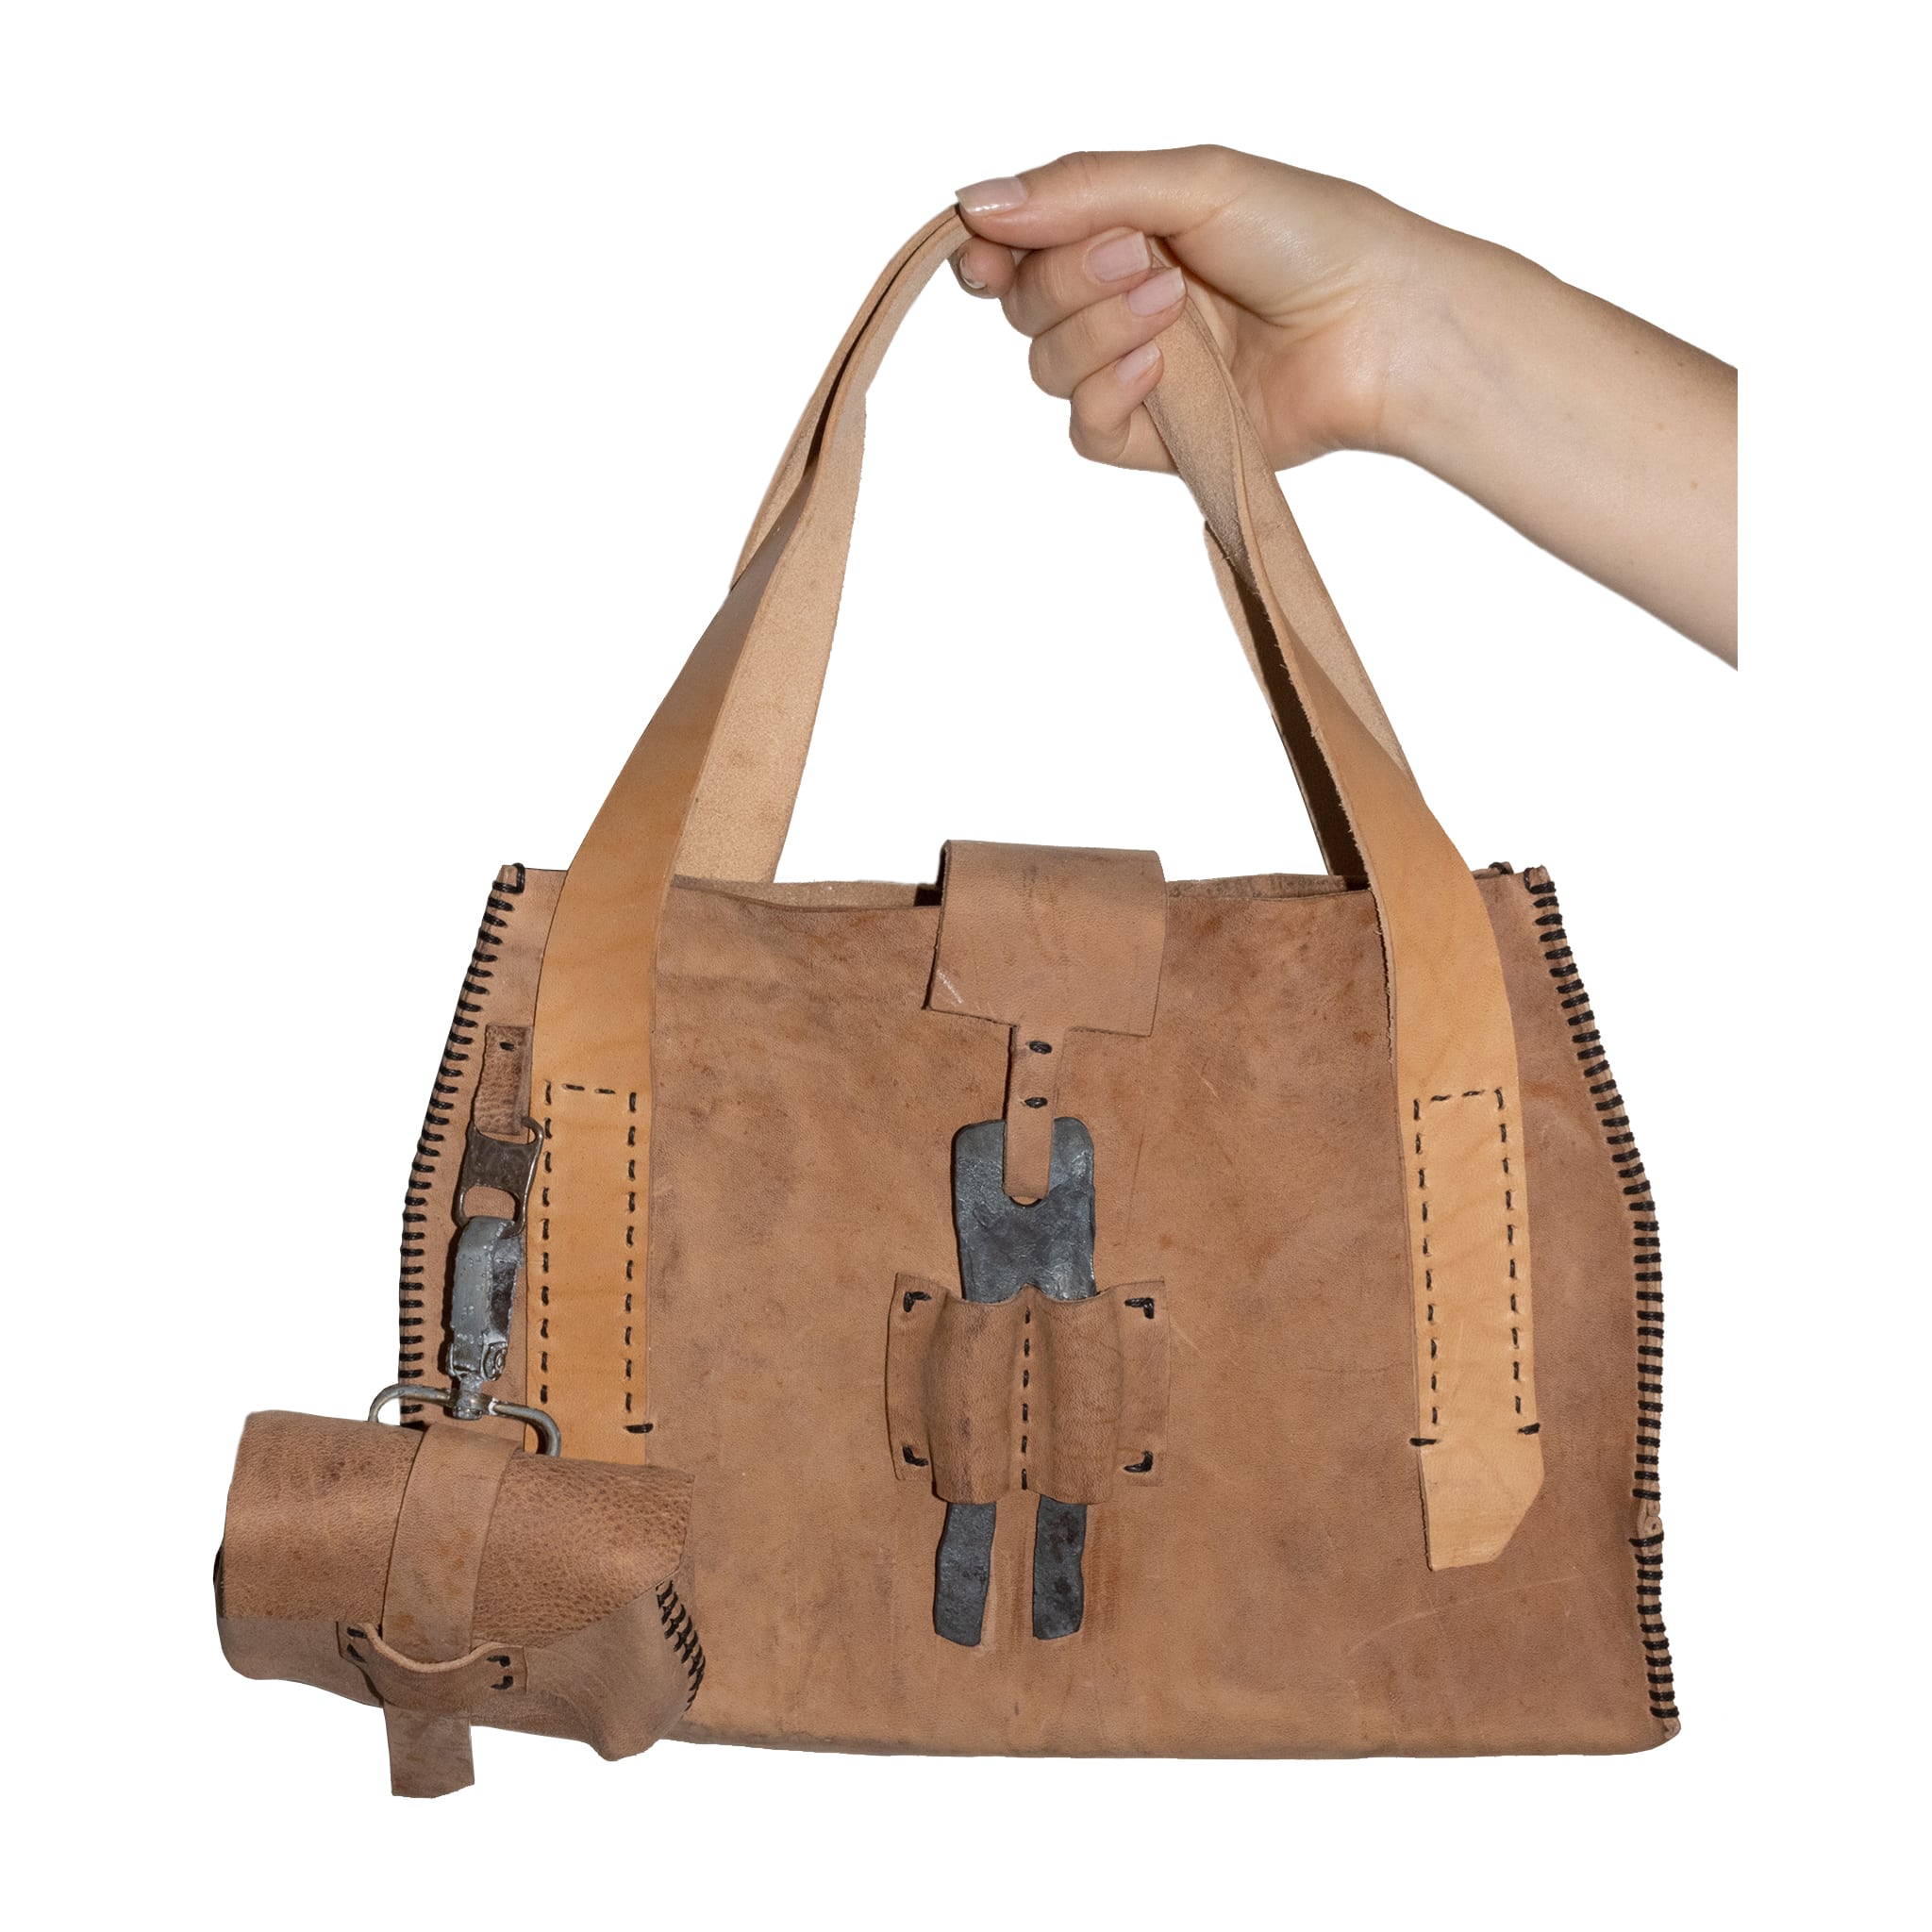 avant garde hand sewn leather handbag from atelier skn available to buy online.